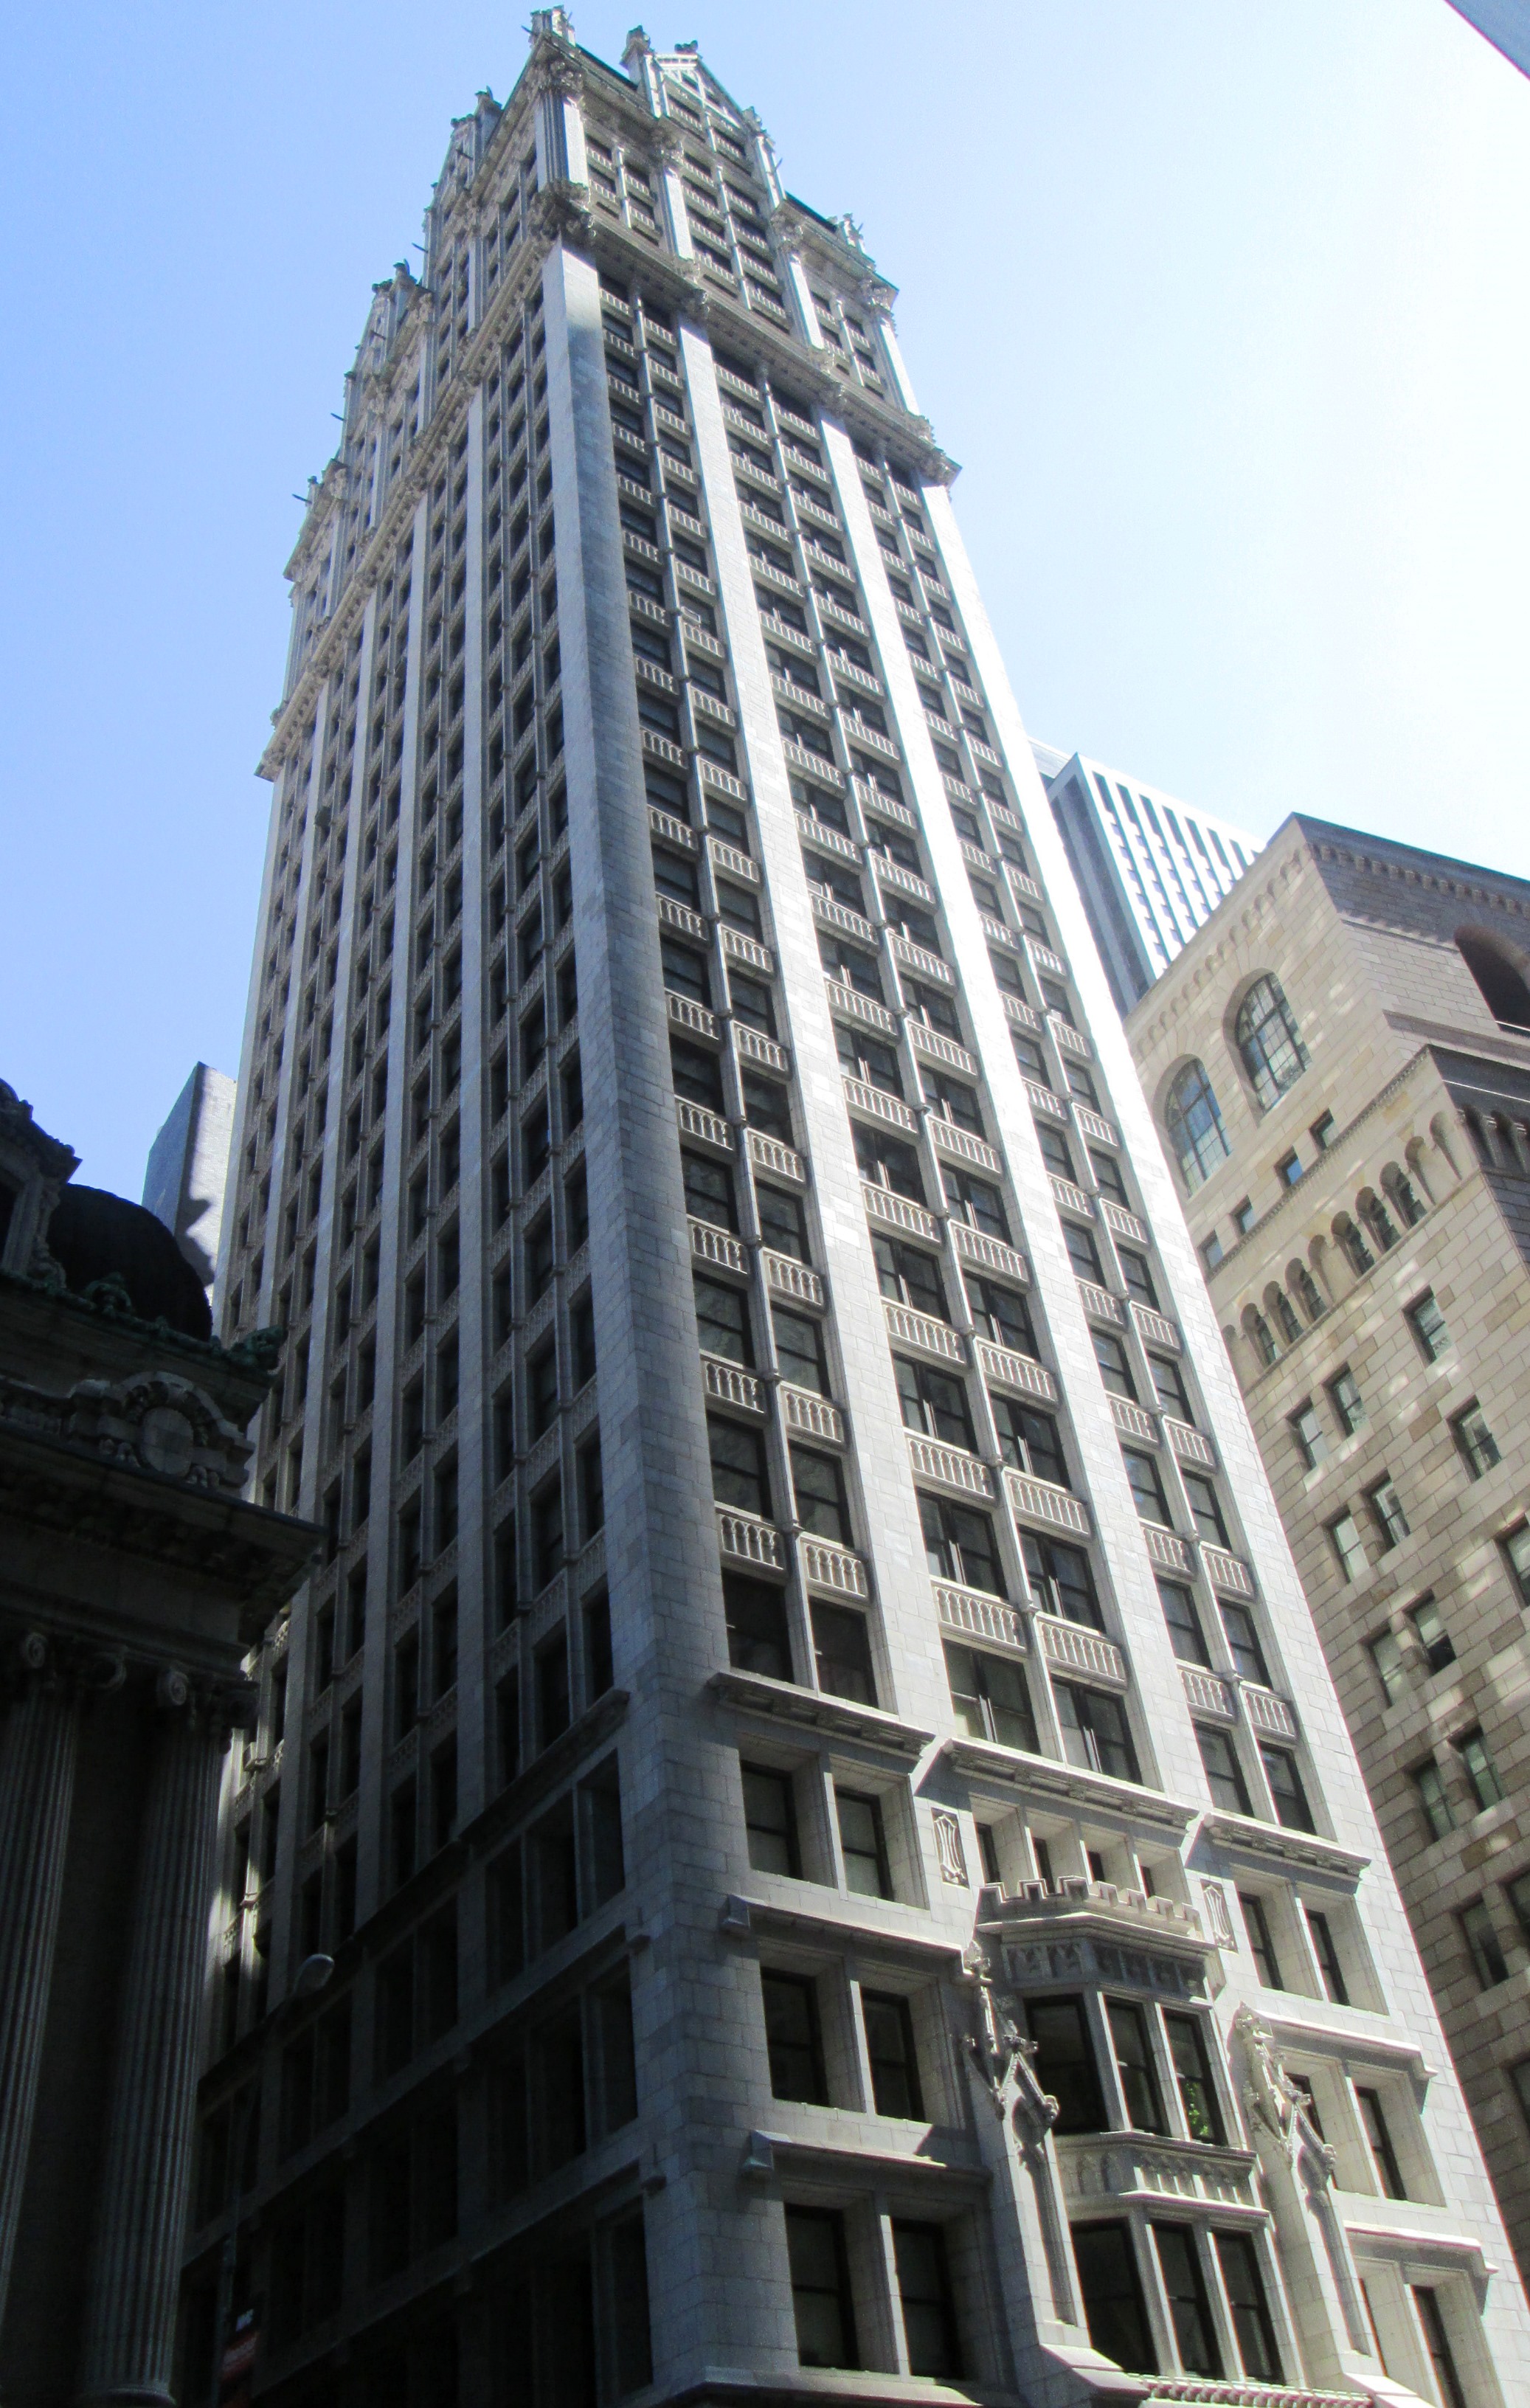 55 Liberty Street, where the law offices of Vahan Cardashian were located in the early 1910s; the Liberty Tower is currently a residential building